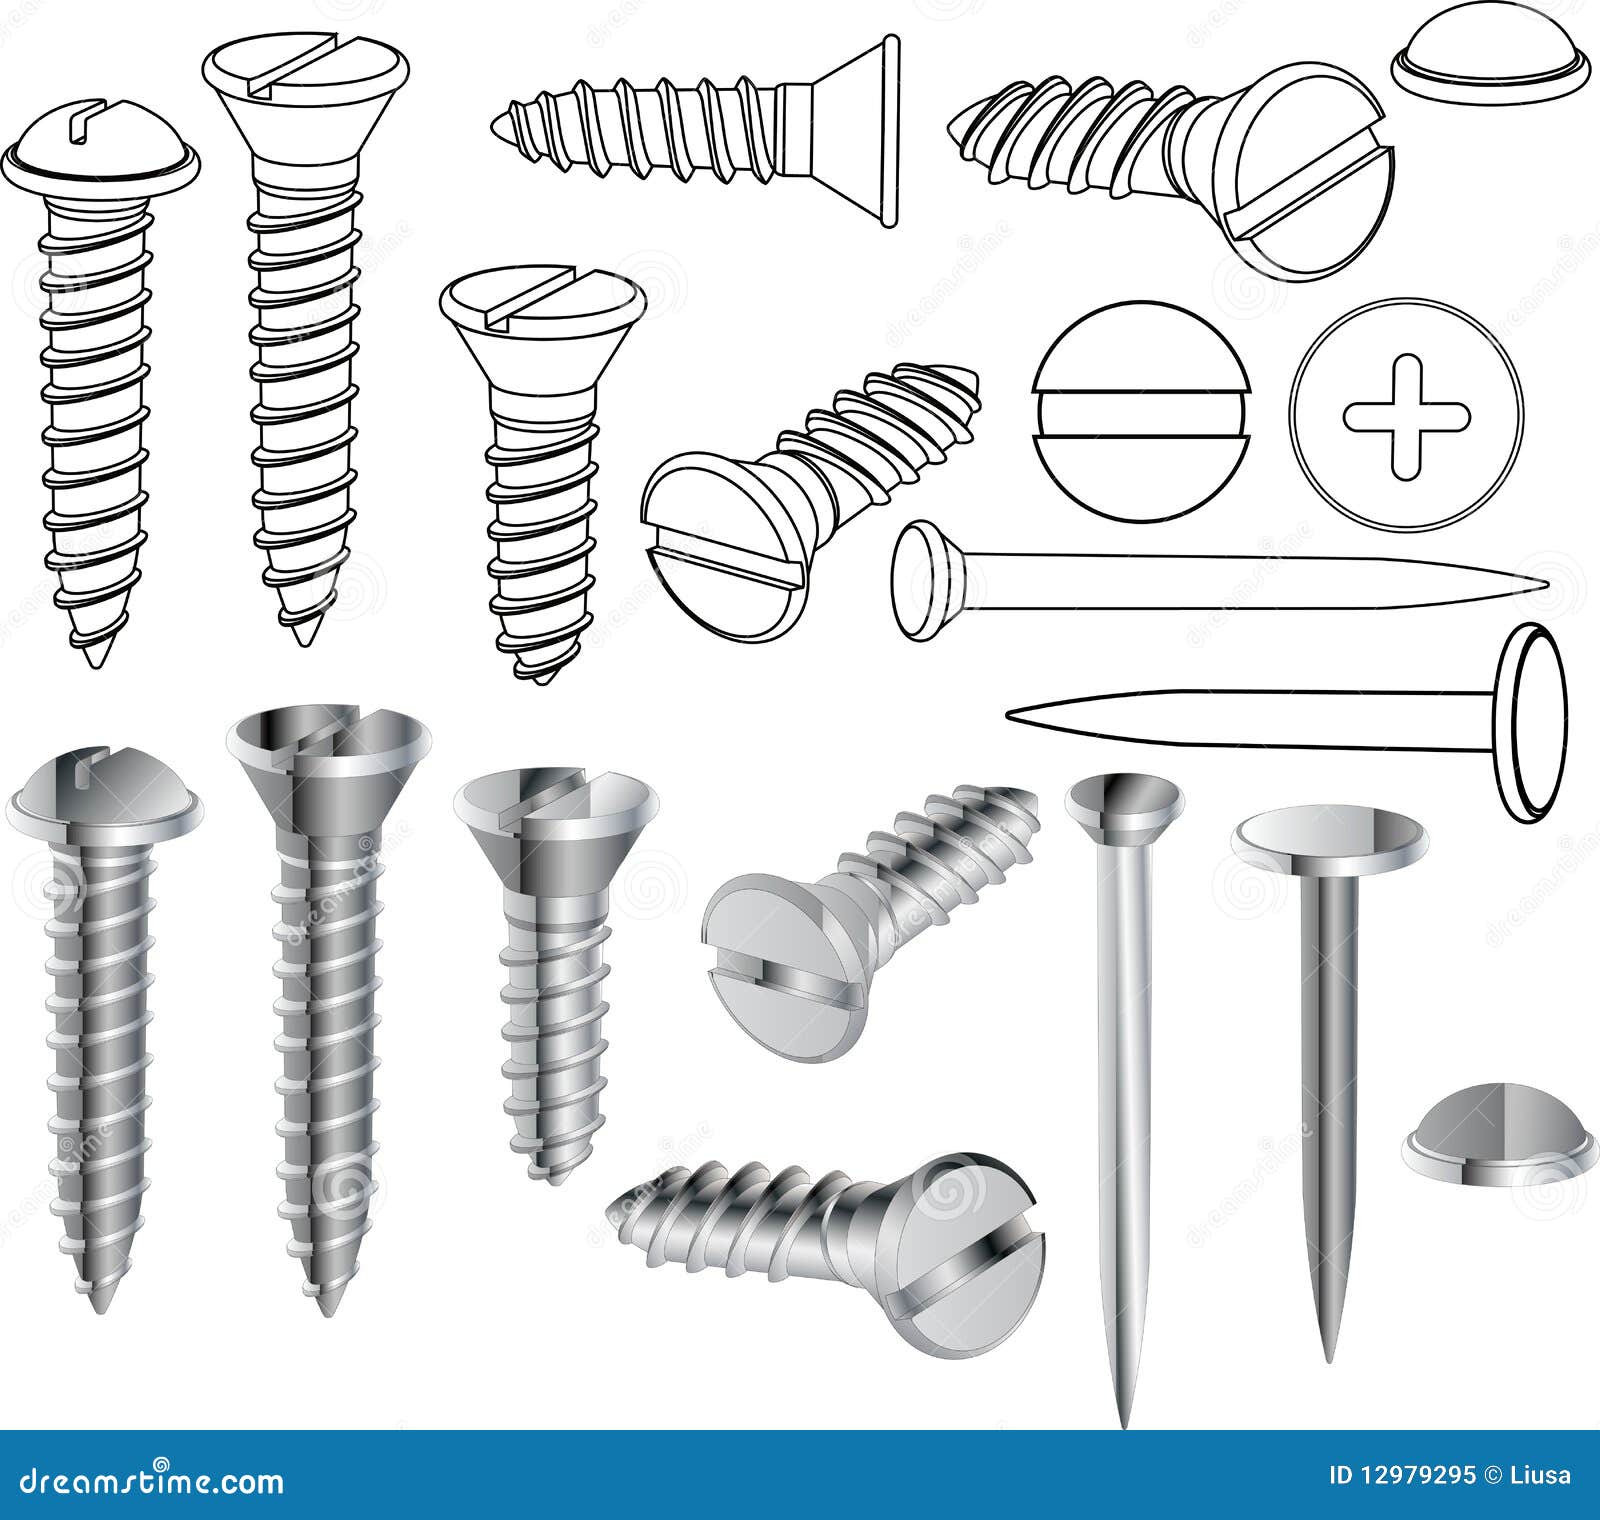 clipart of screws and nails - photo #12